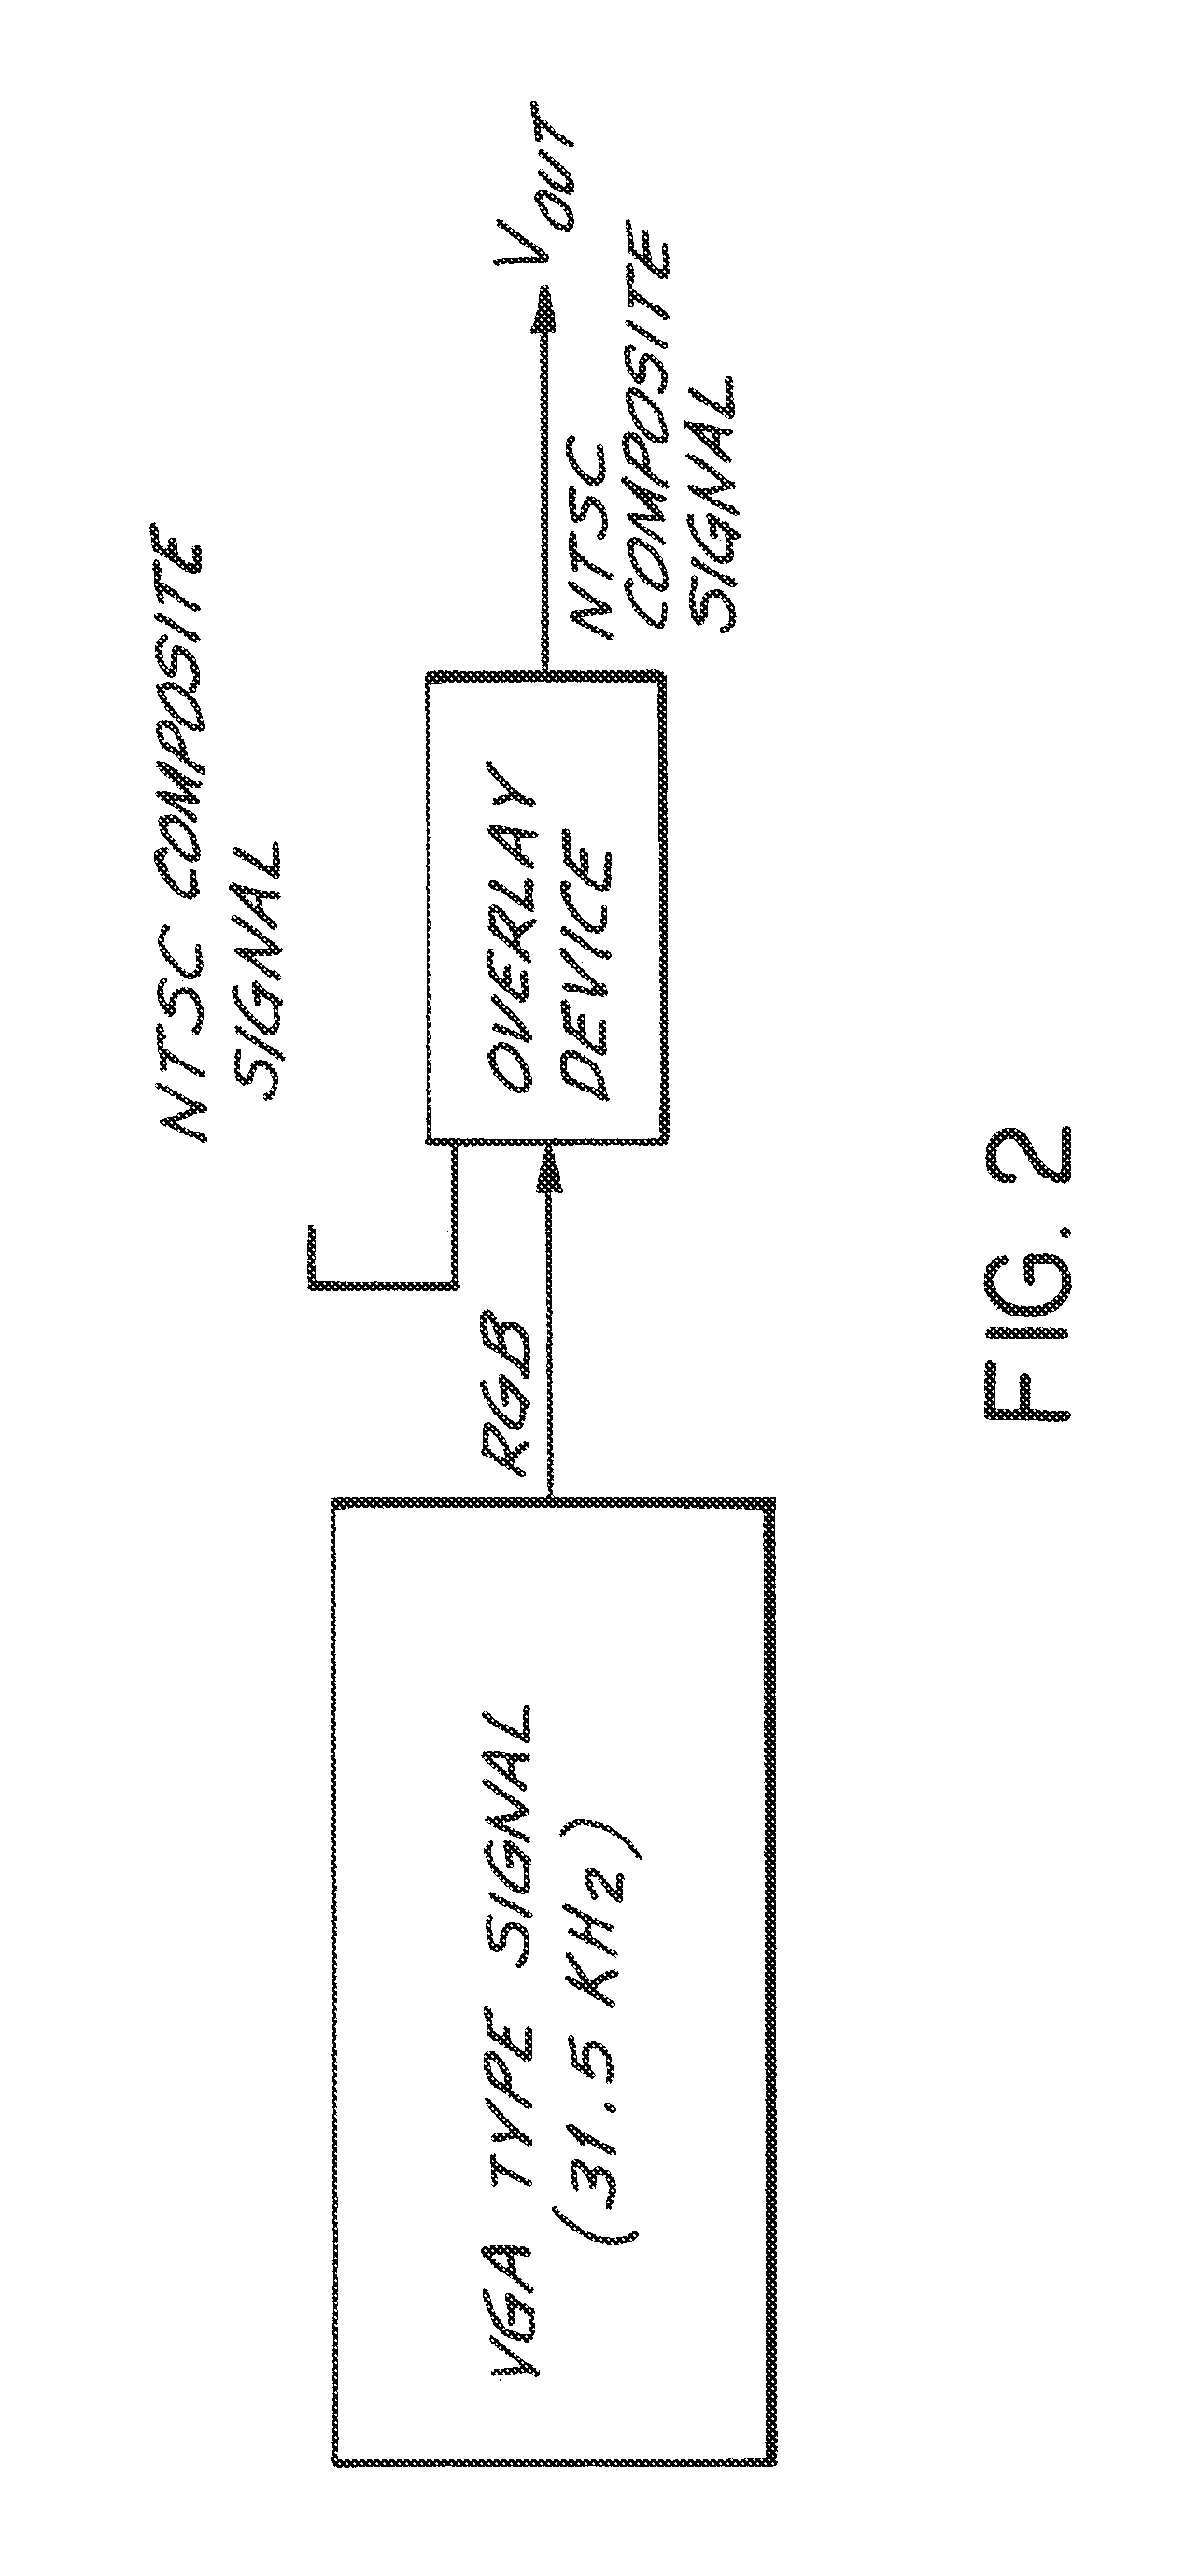 Improved electronic television program guide schedule system and method